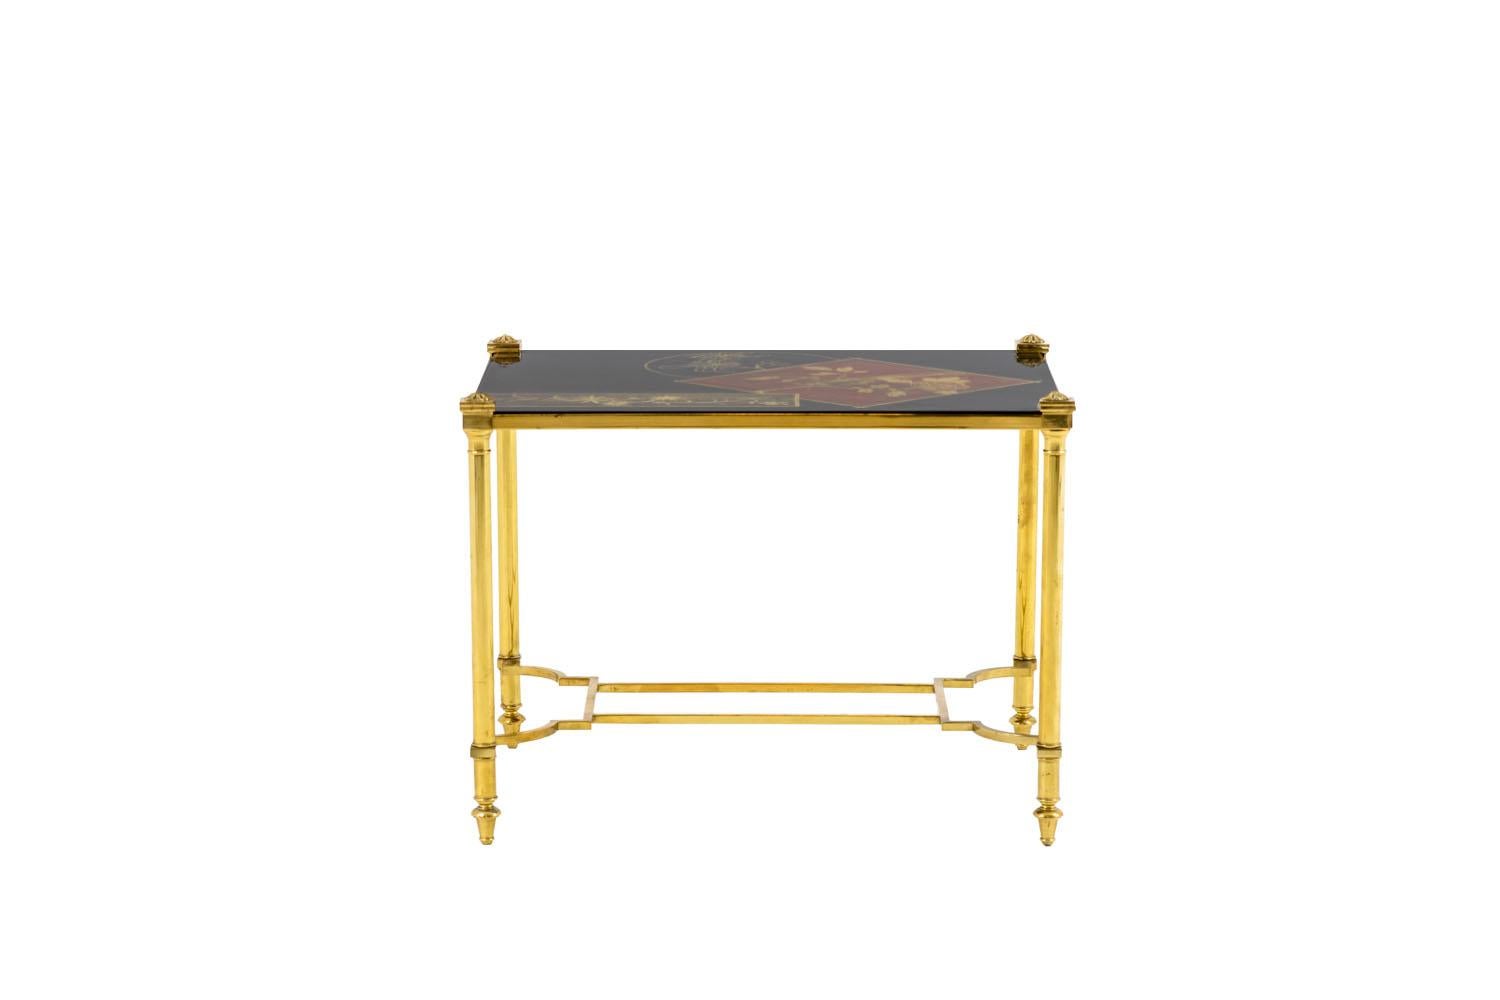 Pair of rectangular lacquer and gilt brass end tables standing on four tubular legs finished by toupie foot. They are linked between them by a rectangular stretcher fixed to the legs by four scalloped bars.
Black background lacquer trays adorned